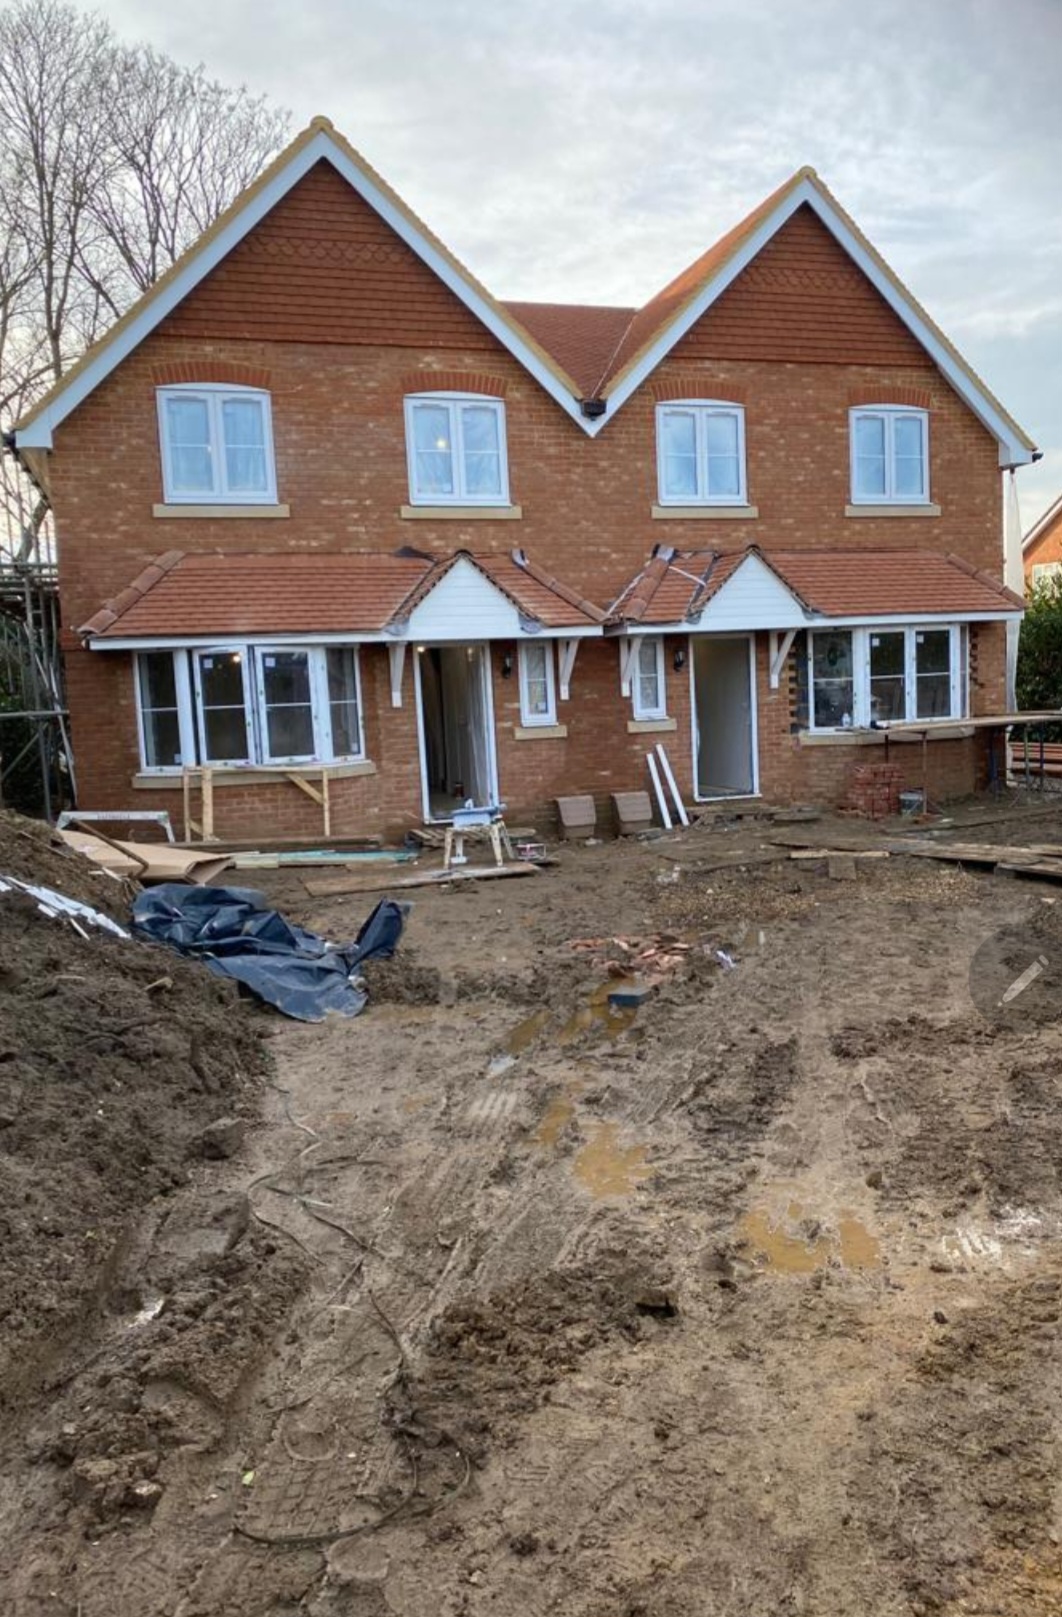 New Build- Two- three bedroom houses in Farnham